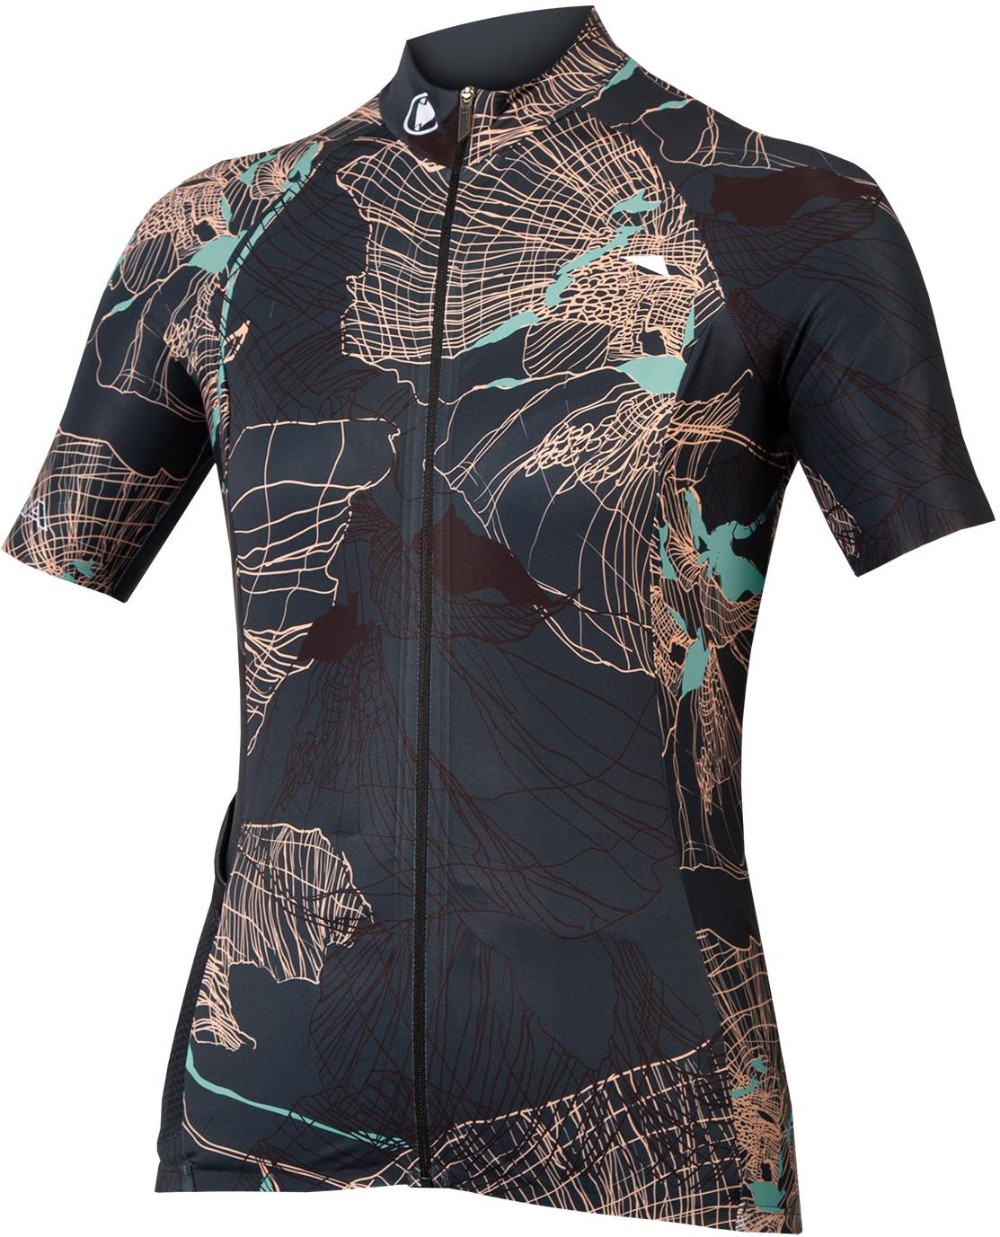 Outdoor Trail Womens Short Sleeve Cycling Jersey Limited Edition image 0